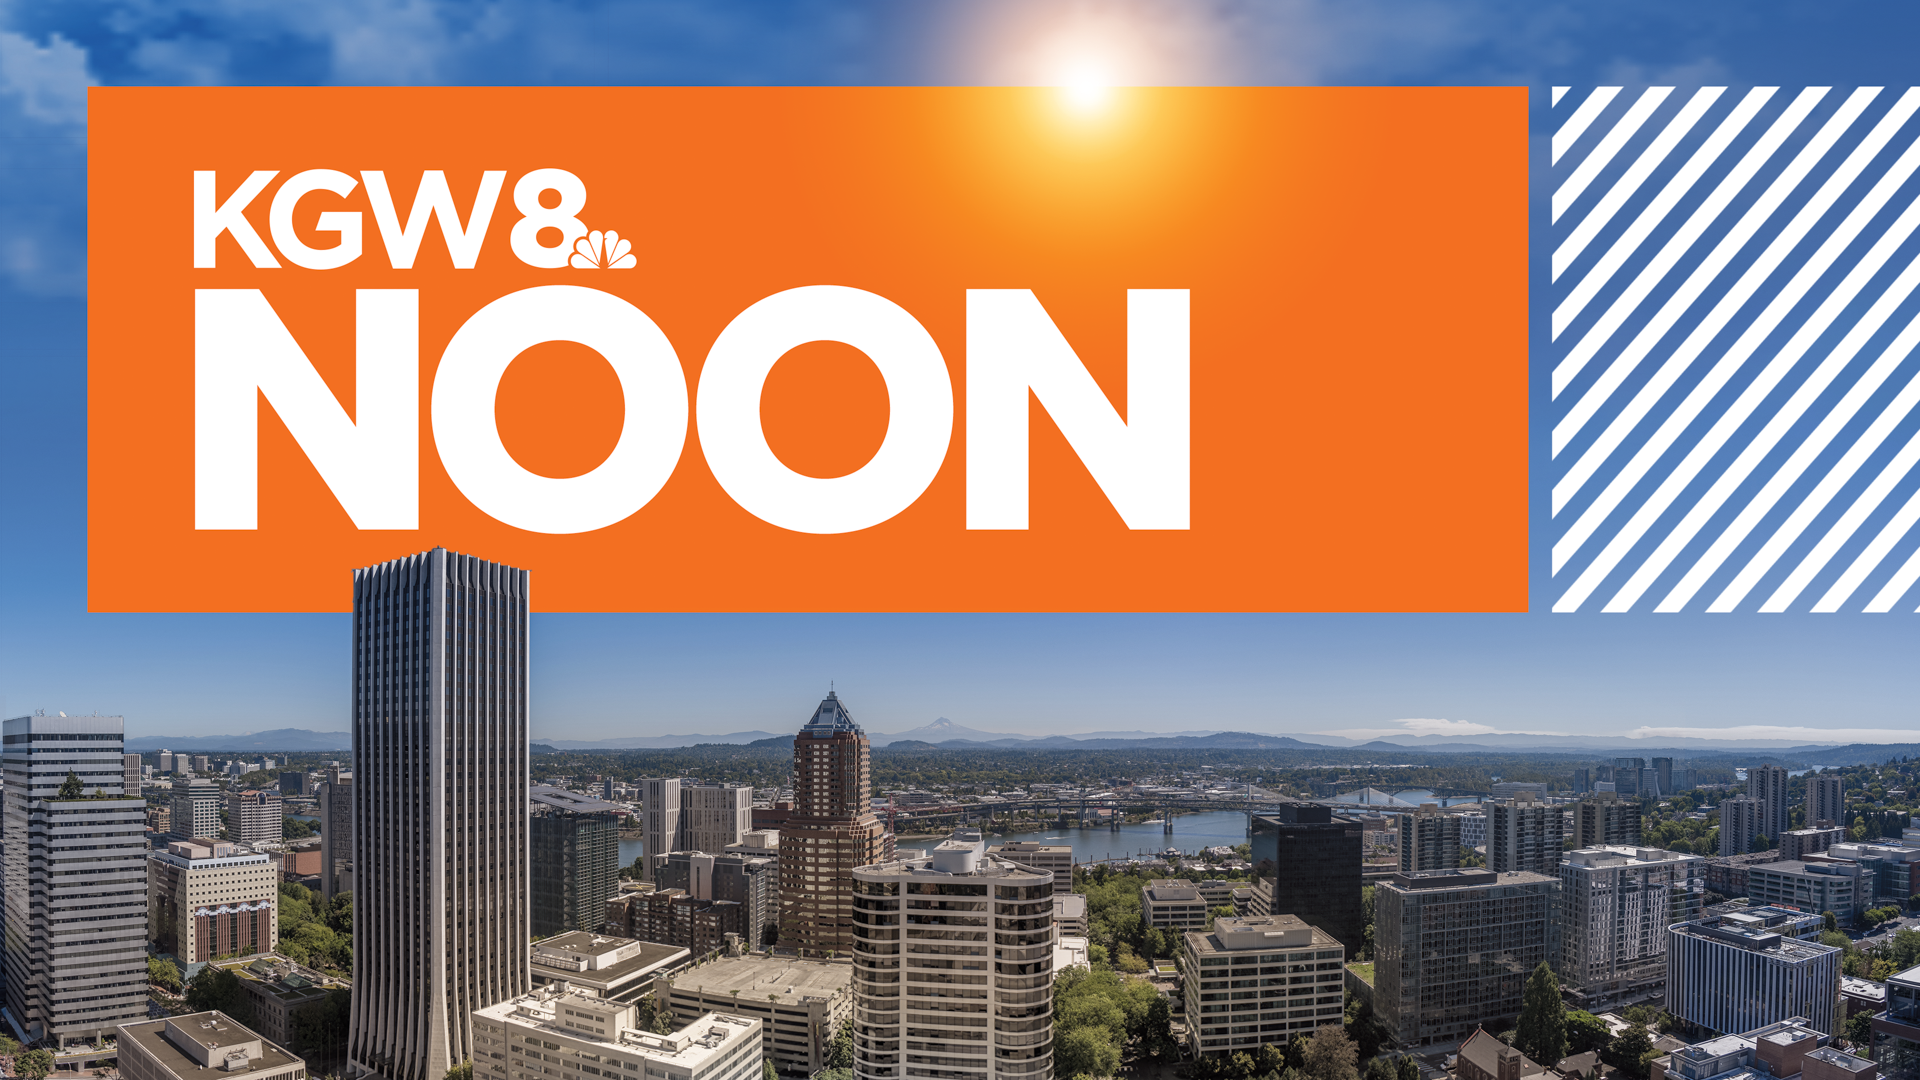 KGW Top Stories: Noon, Wednesday, August 17, 2022